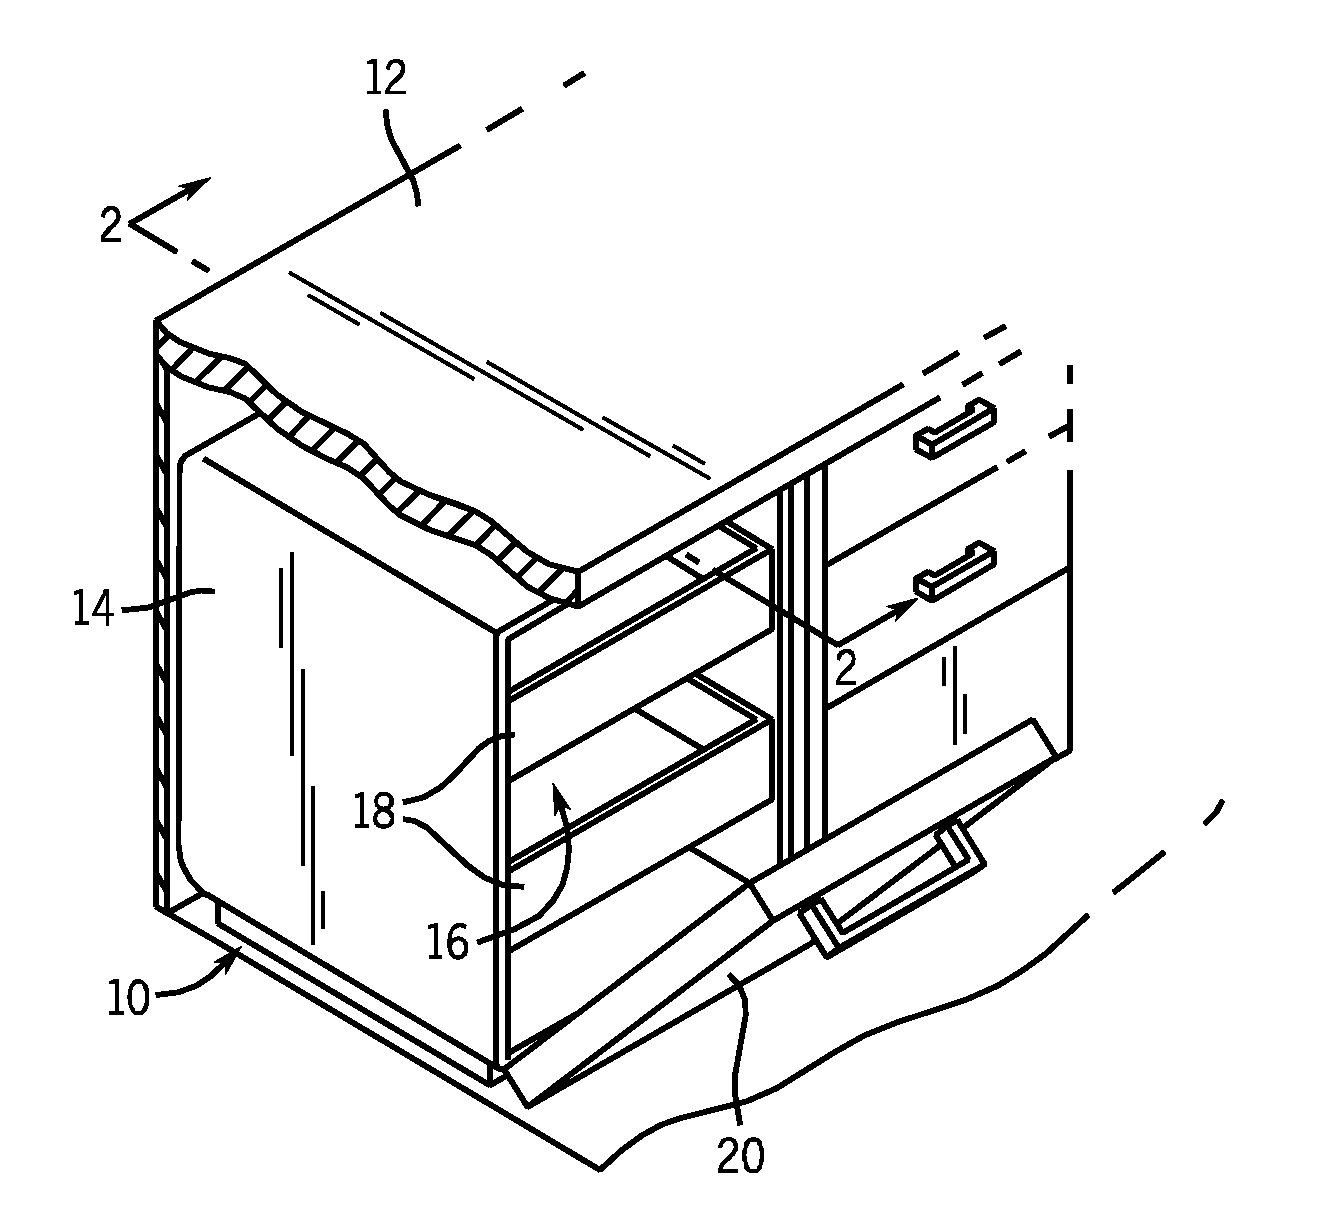 Dishwasher with self-sealing vent fan